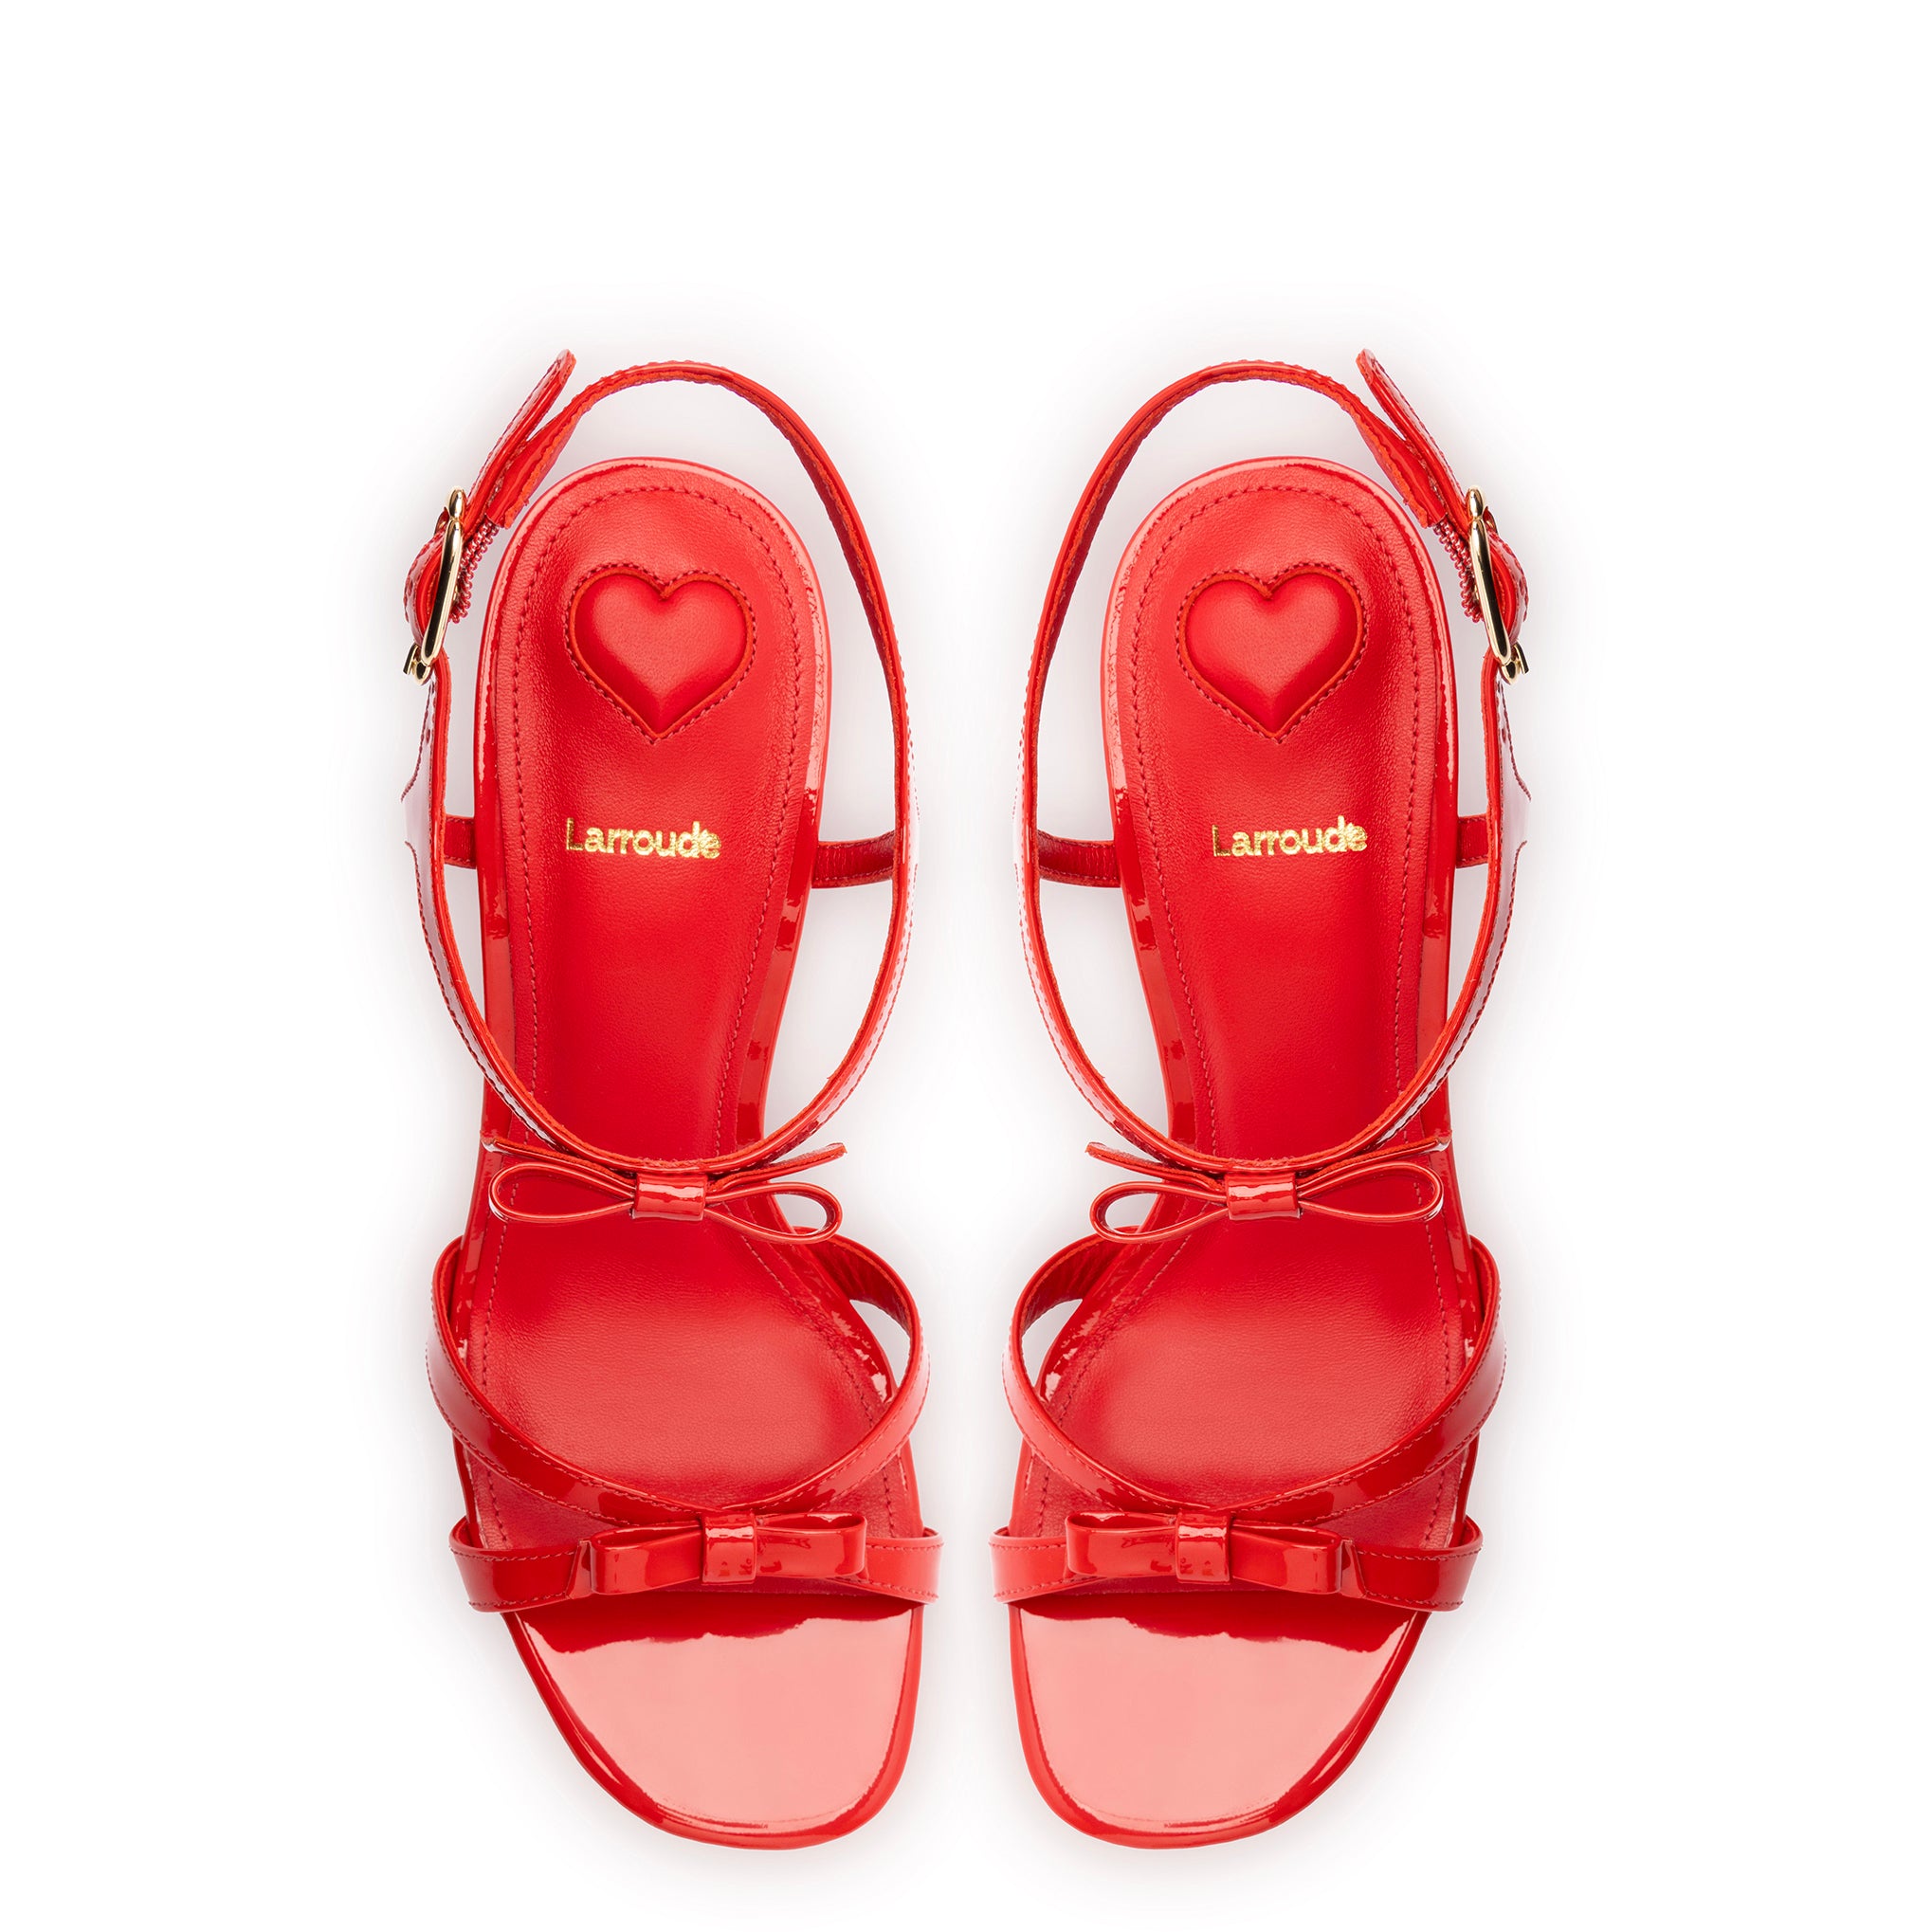 Brooks Sandal In Scarlet Patent Leather